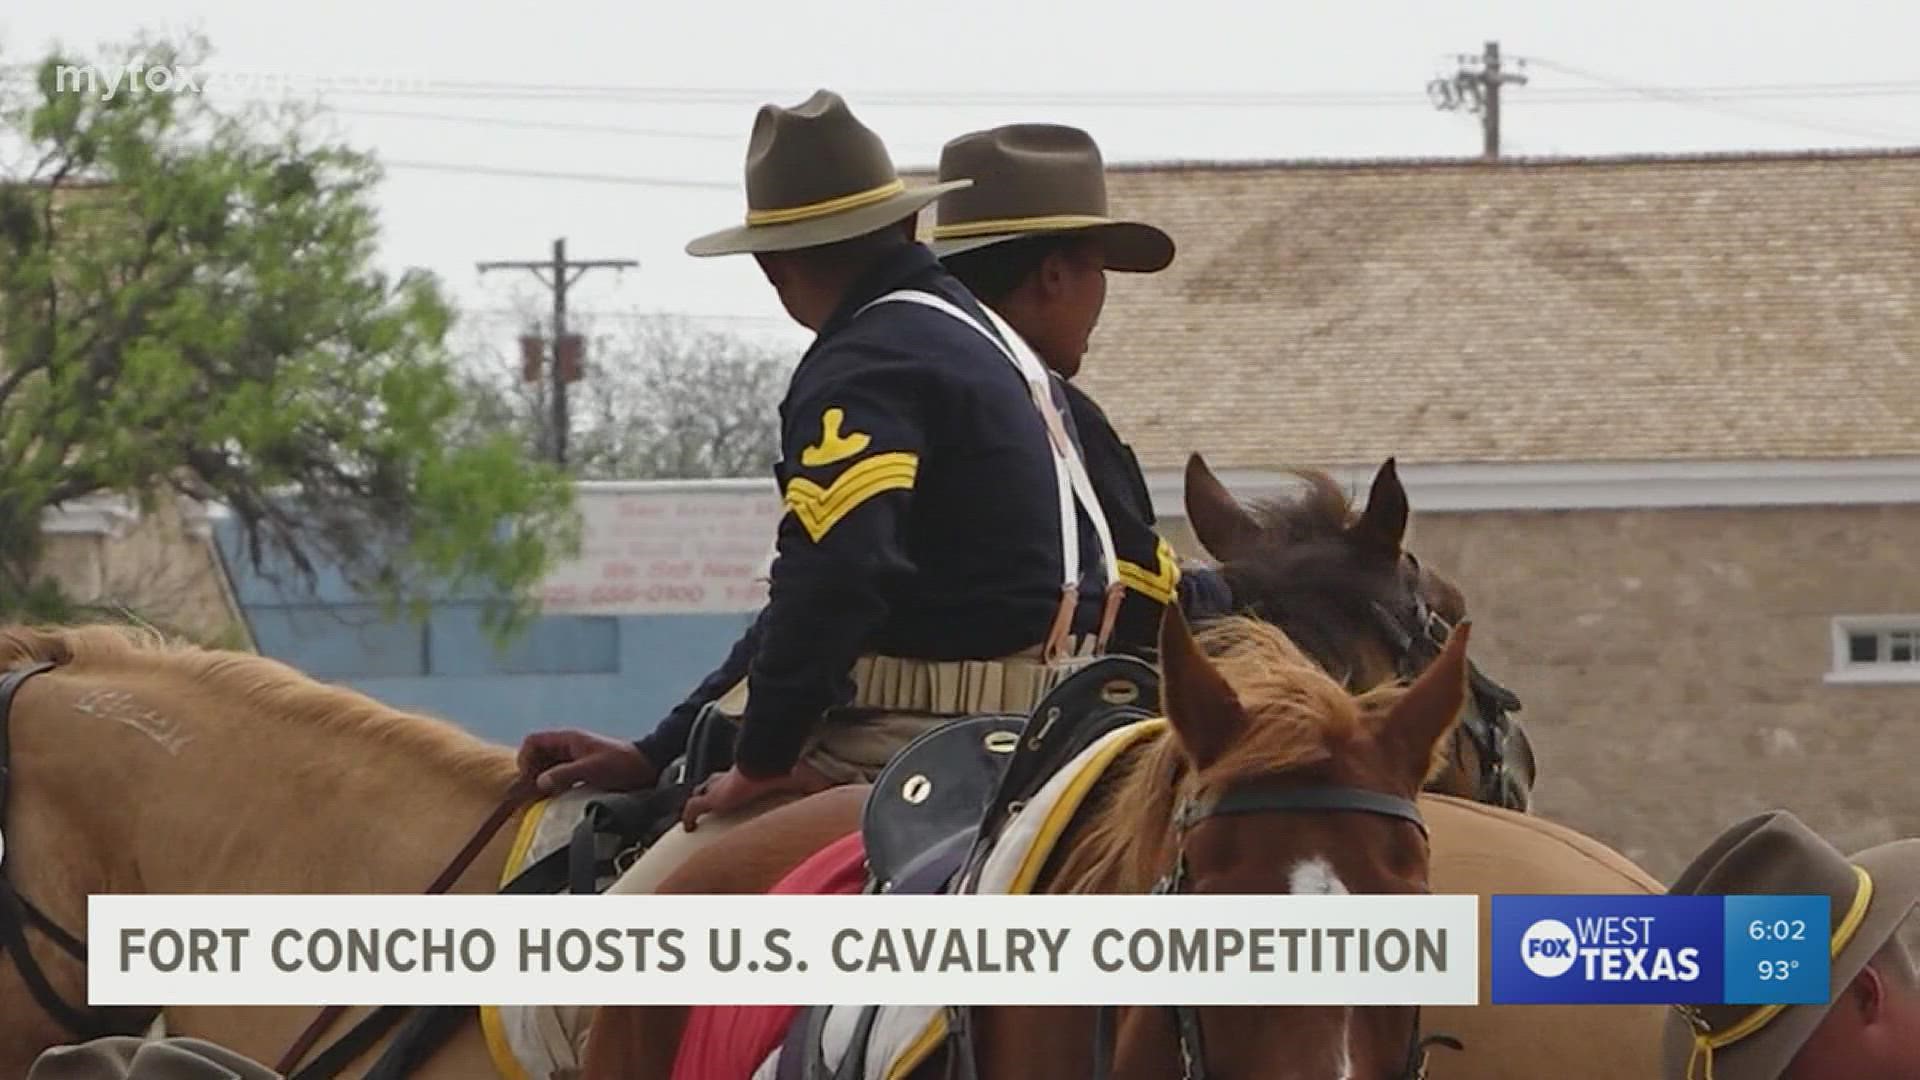 Competitors in the USCA's Regional Cavalry Competition will participate on various courses for the next three days.